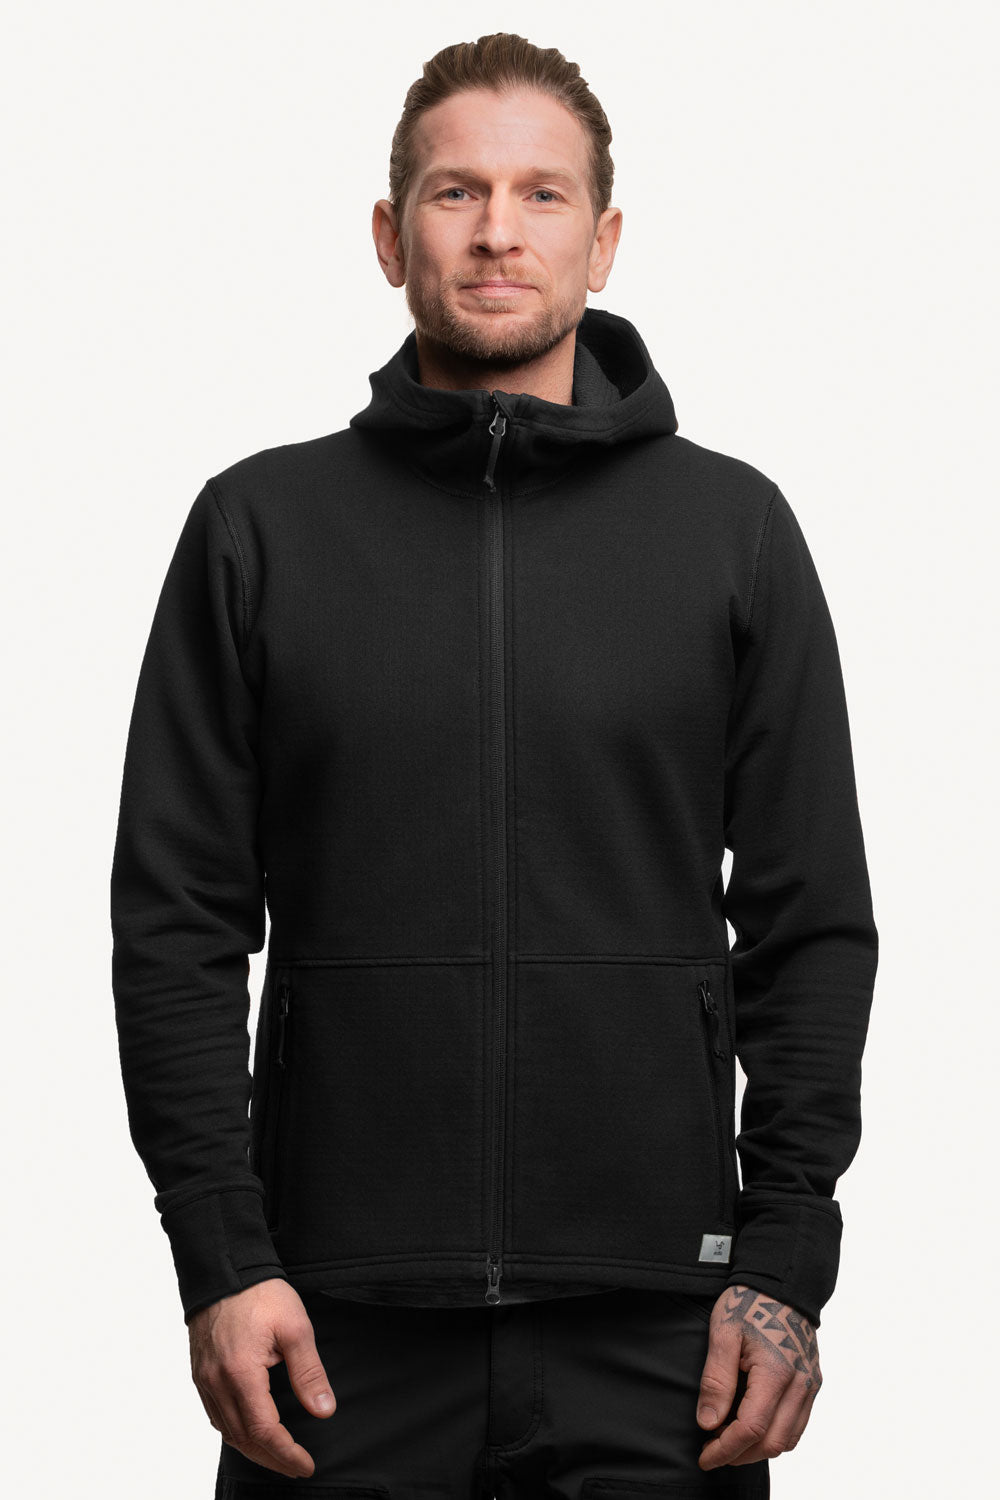 Men's all weather technical hoodie.